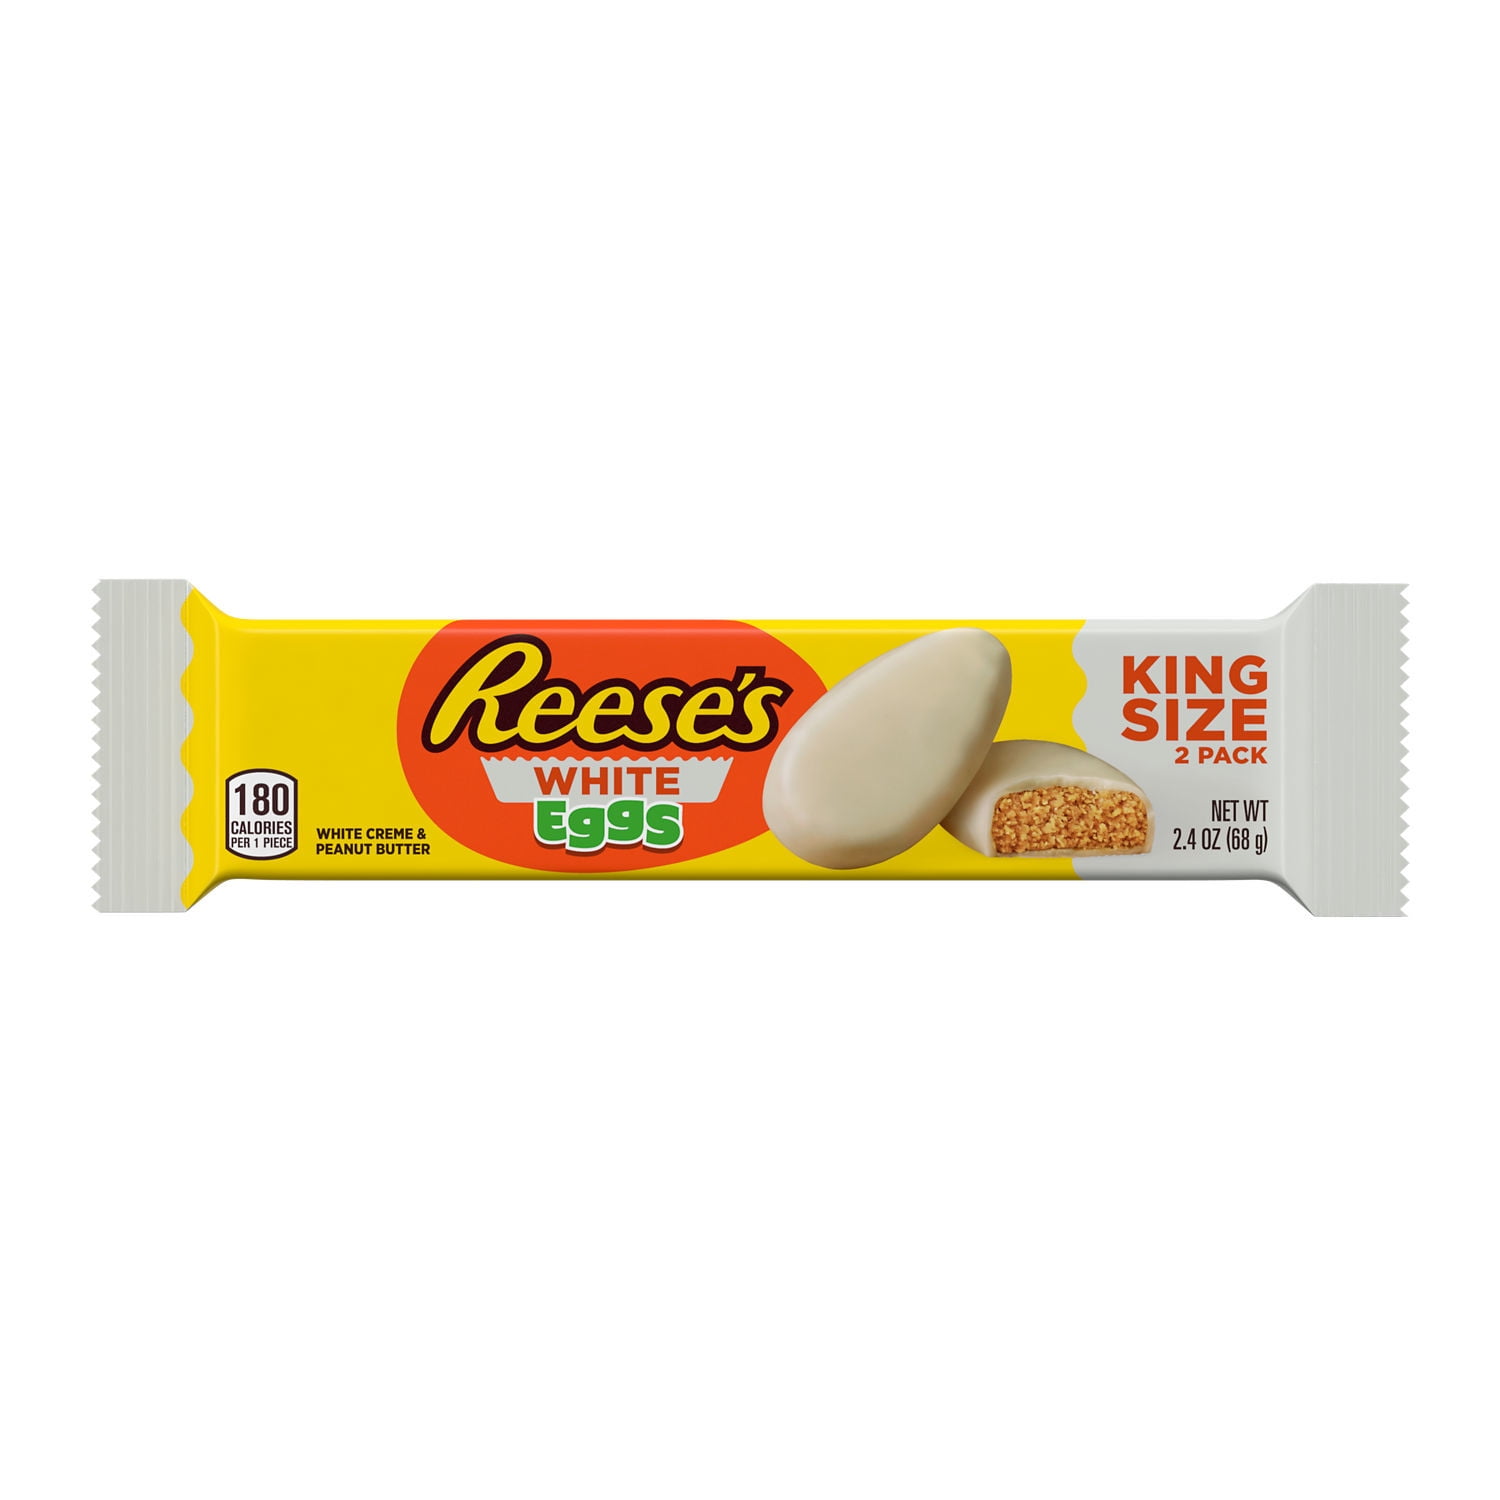 Reese's, White Creme Peanut Butter Eggs Candy, Easter, 2.4 oz, King Size Pack